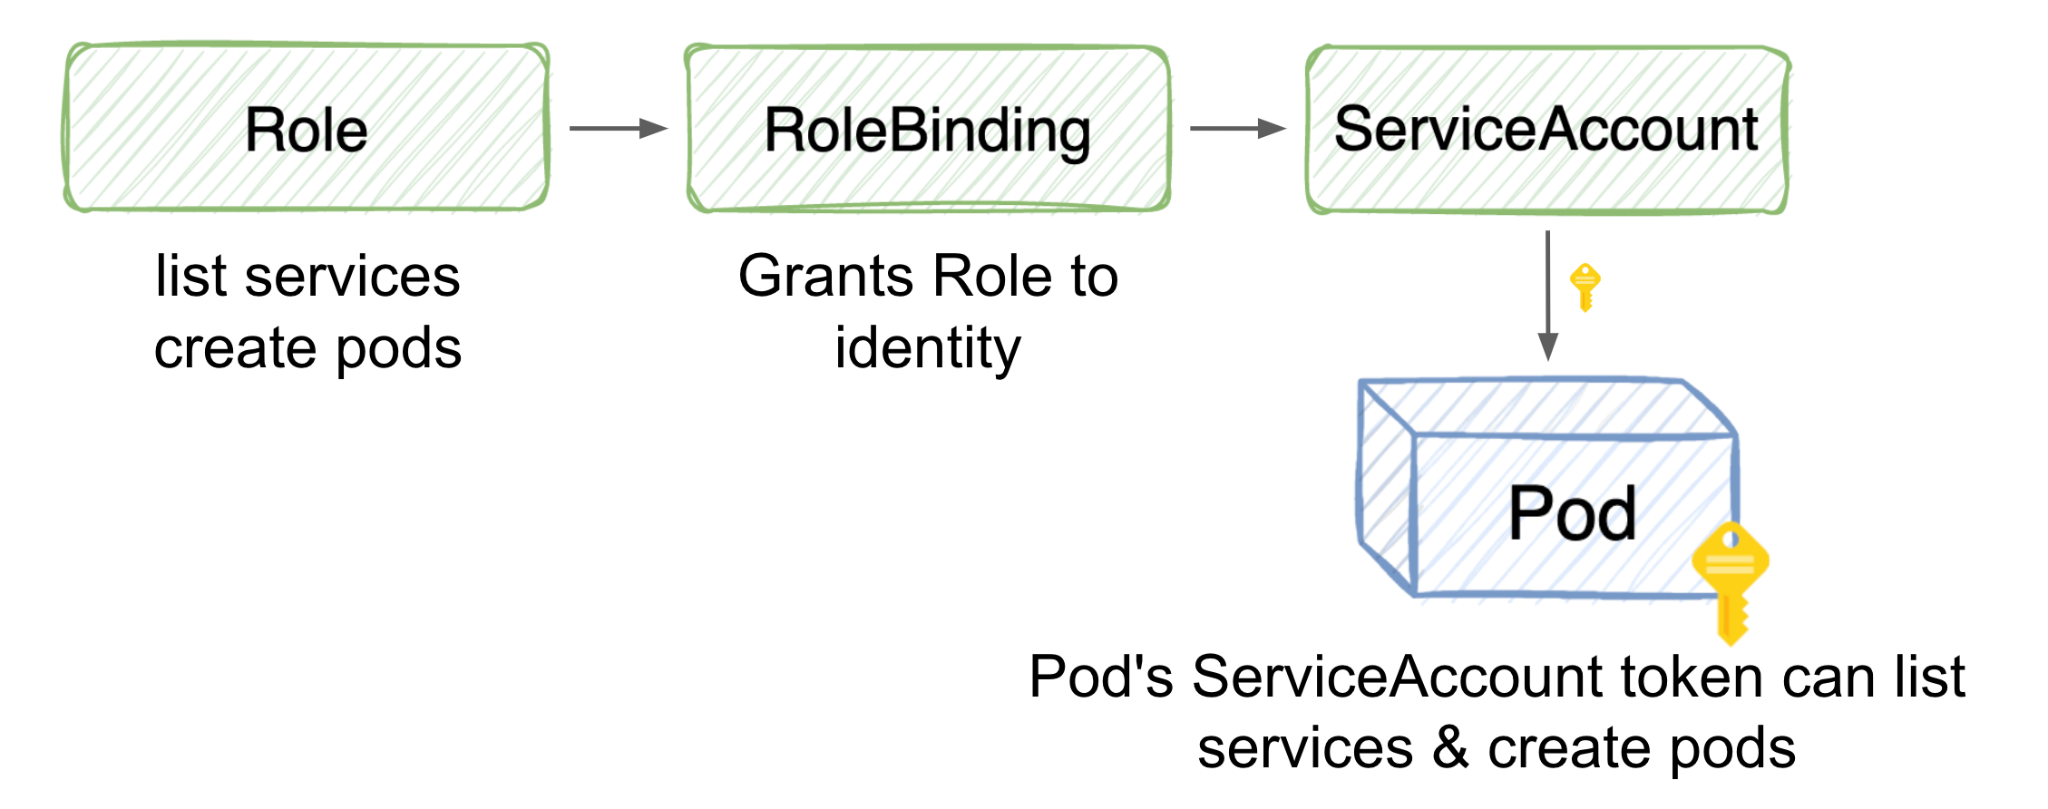 Image 3 is a diagram of the permissions granted to a Kubernetes pod. The role lists the services that create pods. RoleBinding grants the identity to the role. The service account now has the key to create the pod. 